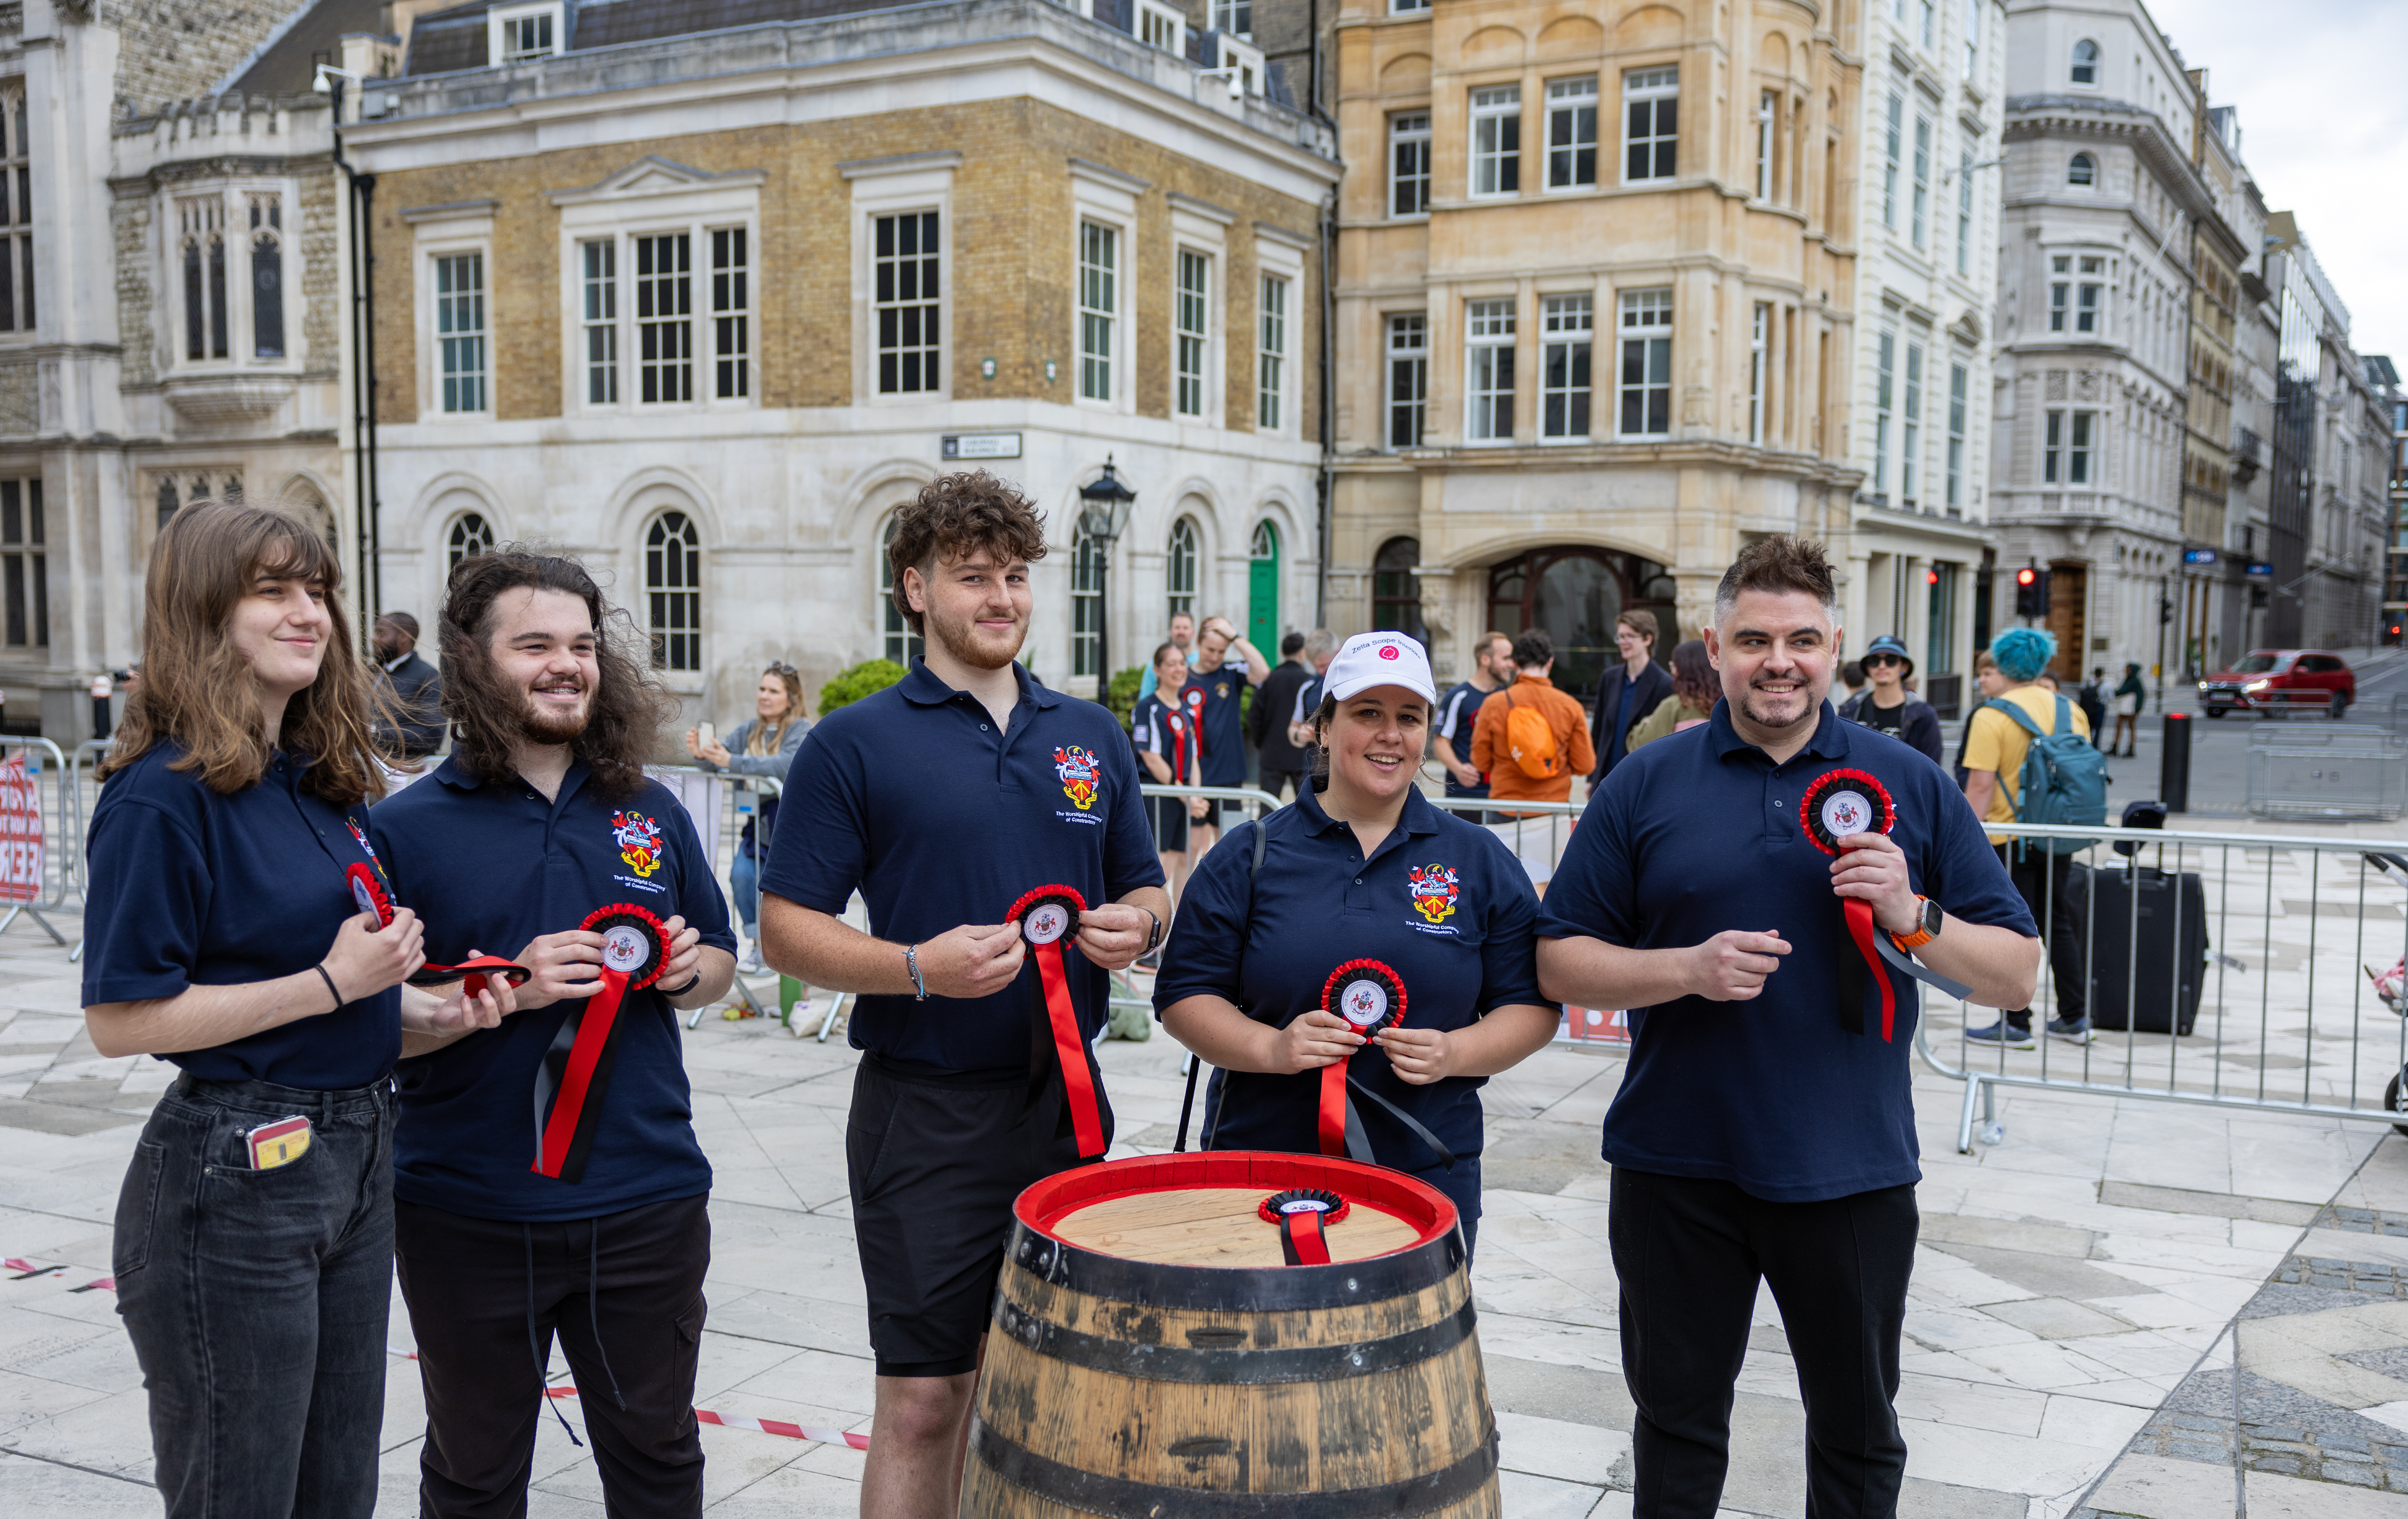 The Worshipful Company Of Constructors Joins The Third Annual Cask Race At Guildhall Yard!